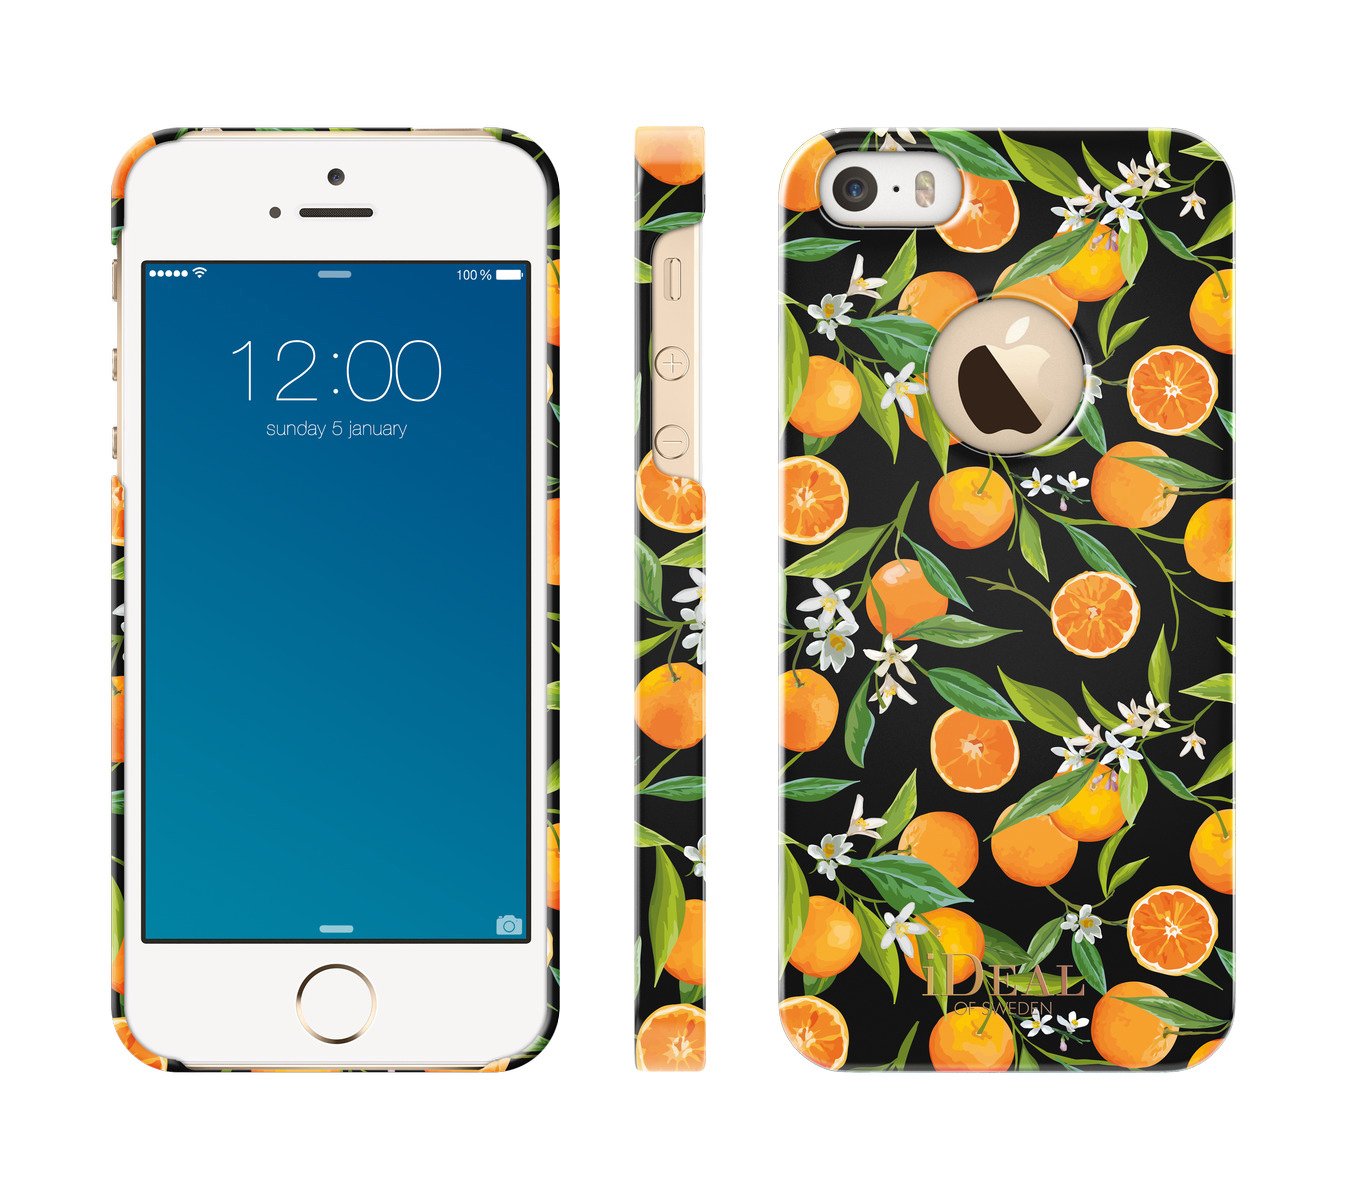 IDEAL OF SWEDEN Fashion, (2016), Apple, iPhone Fall SE Backcover, Tropical